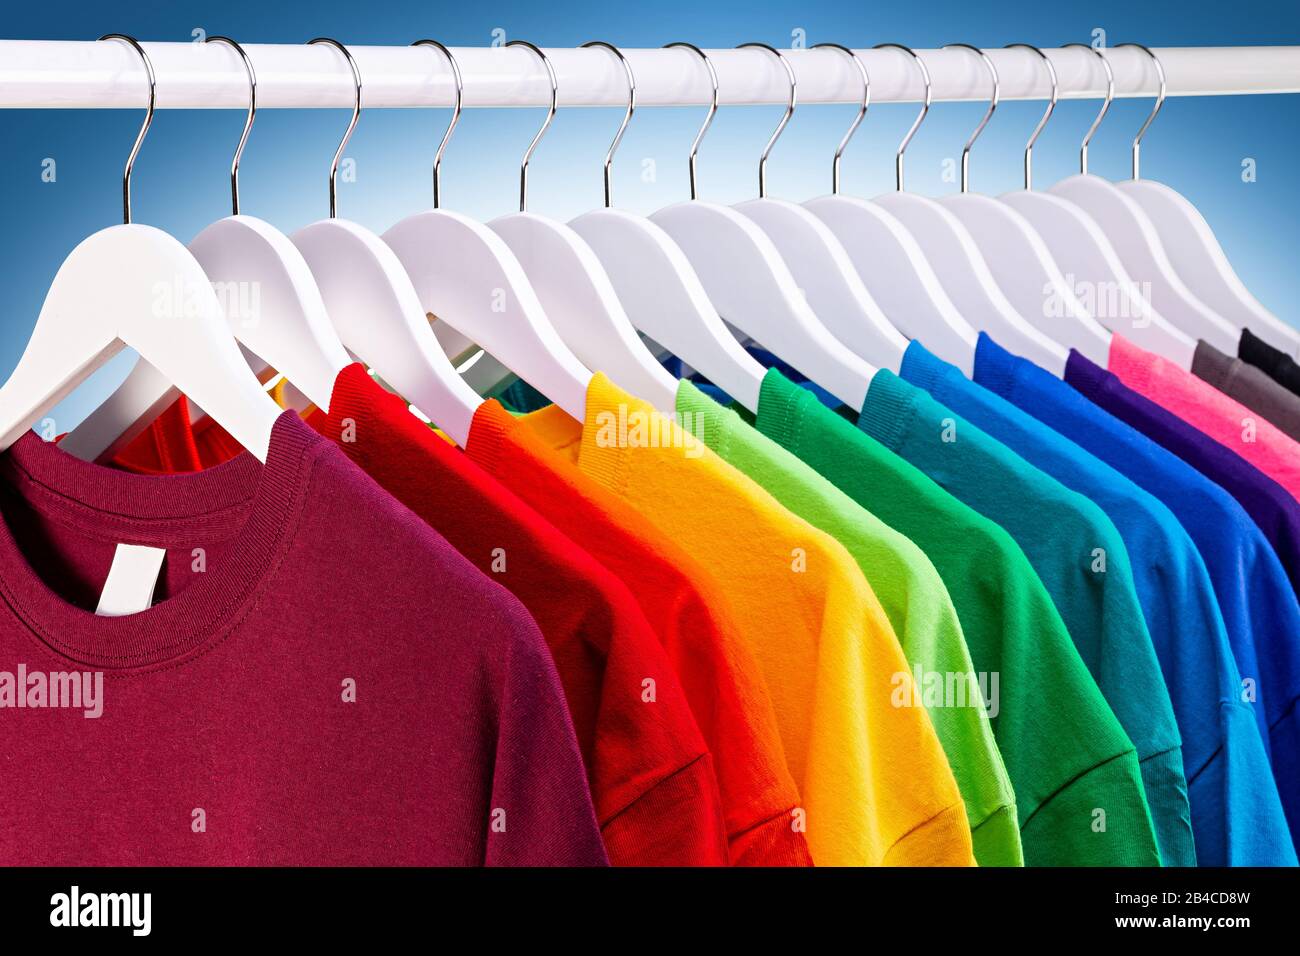 https://c8.alamy.com/comp/2B4CD8W/row-of-many-fresh-new-fabric-cotton-t-shirts-in-colorful-rainbow-colors-hangng-on-clothes-rail-in-wrdrobe-various-colored-shirts-on-blue-white-backgr-2B4CD8W.jpg